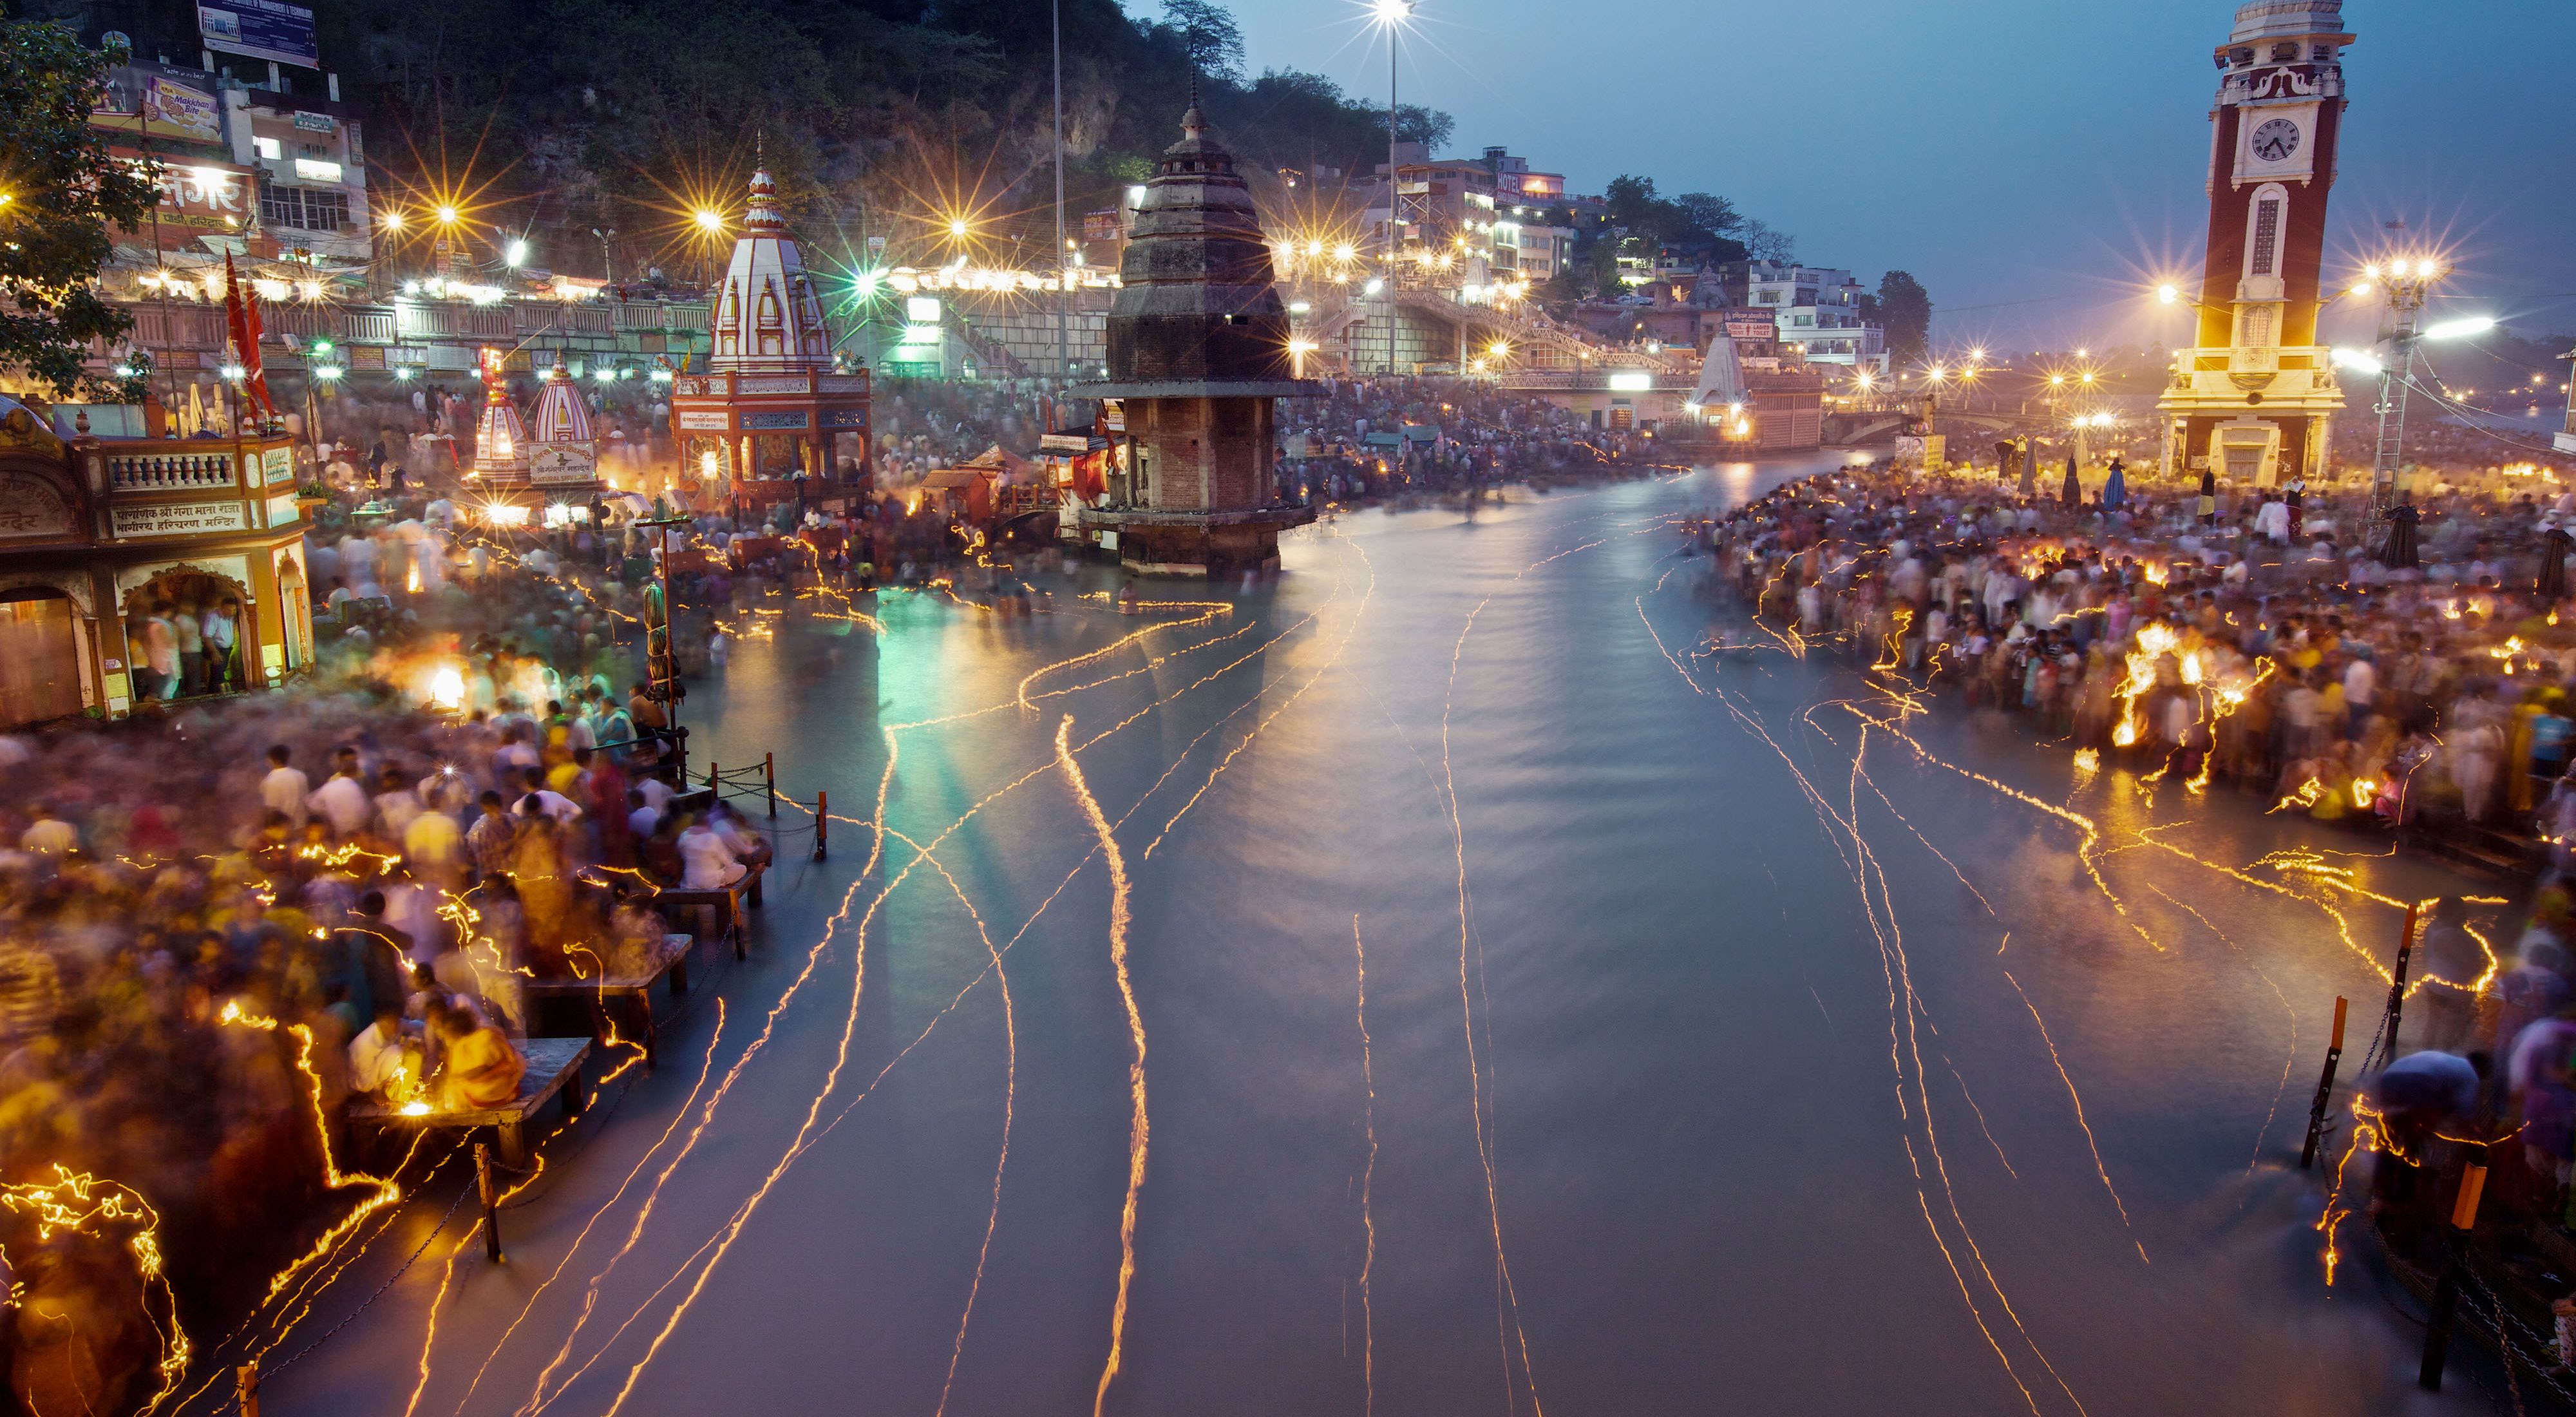 The Ganges River in India at night, reflecting the lights of buildings and passing boats